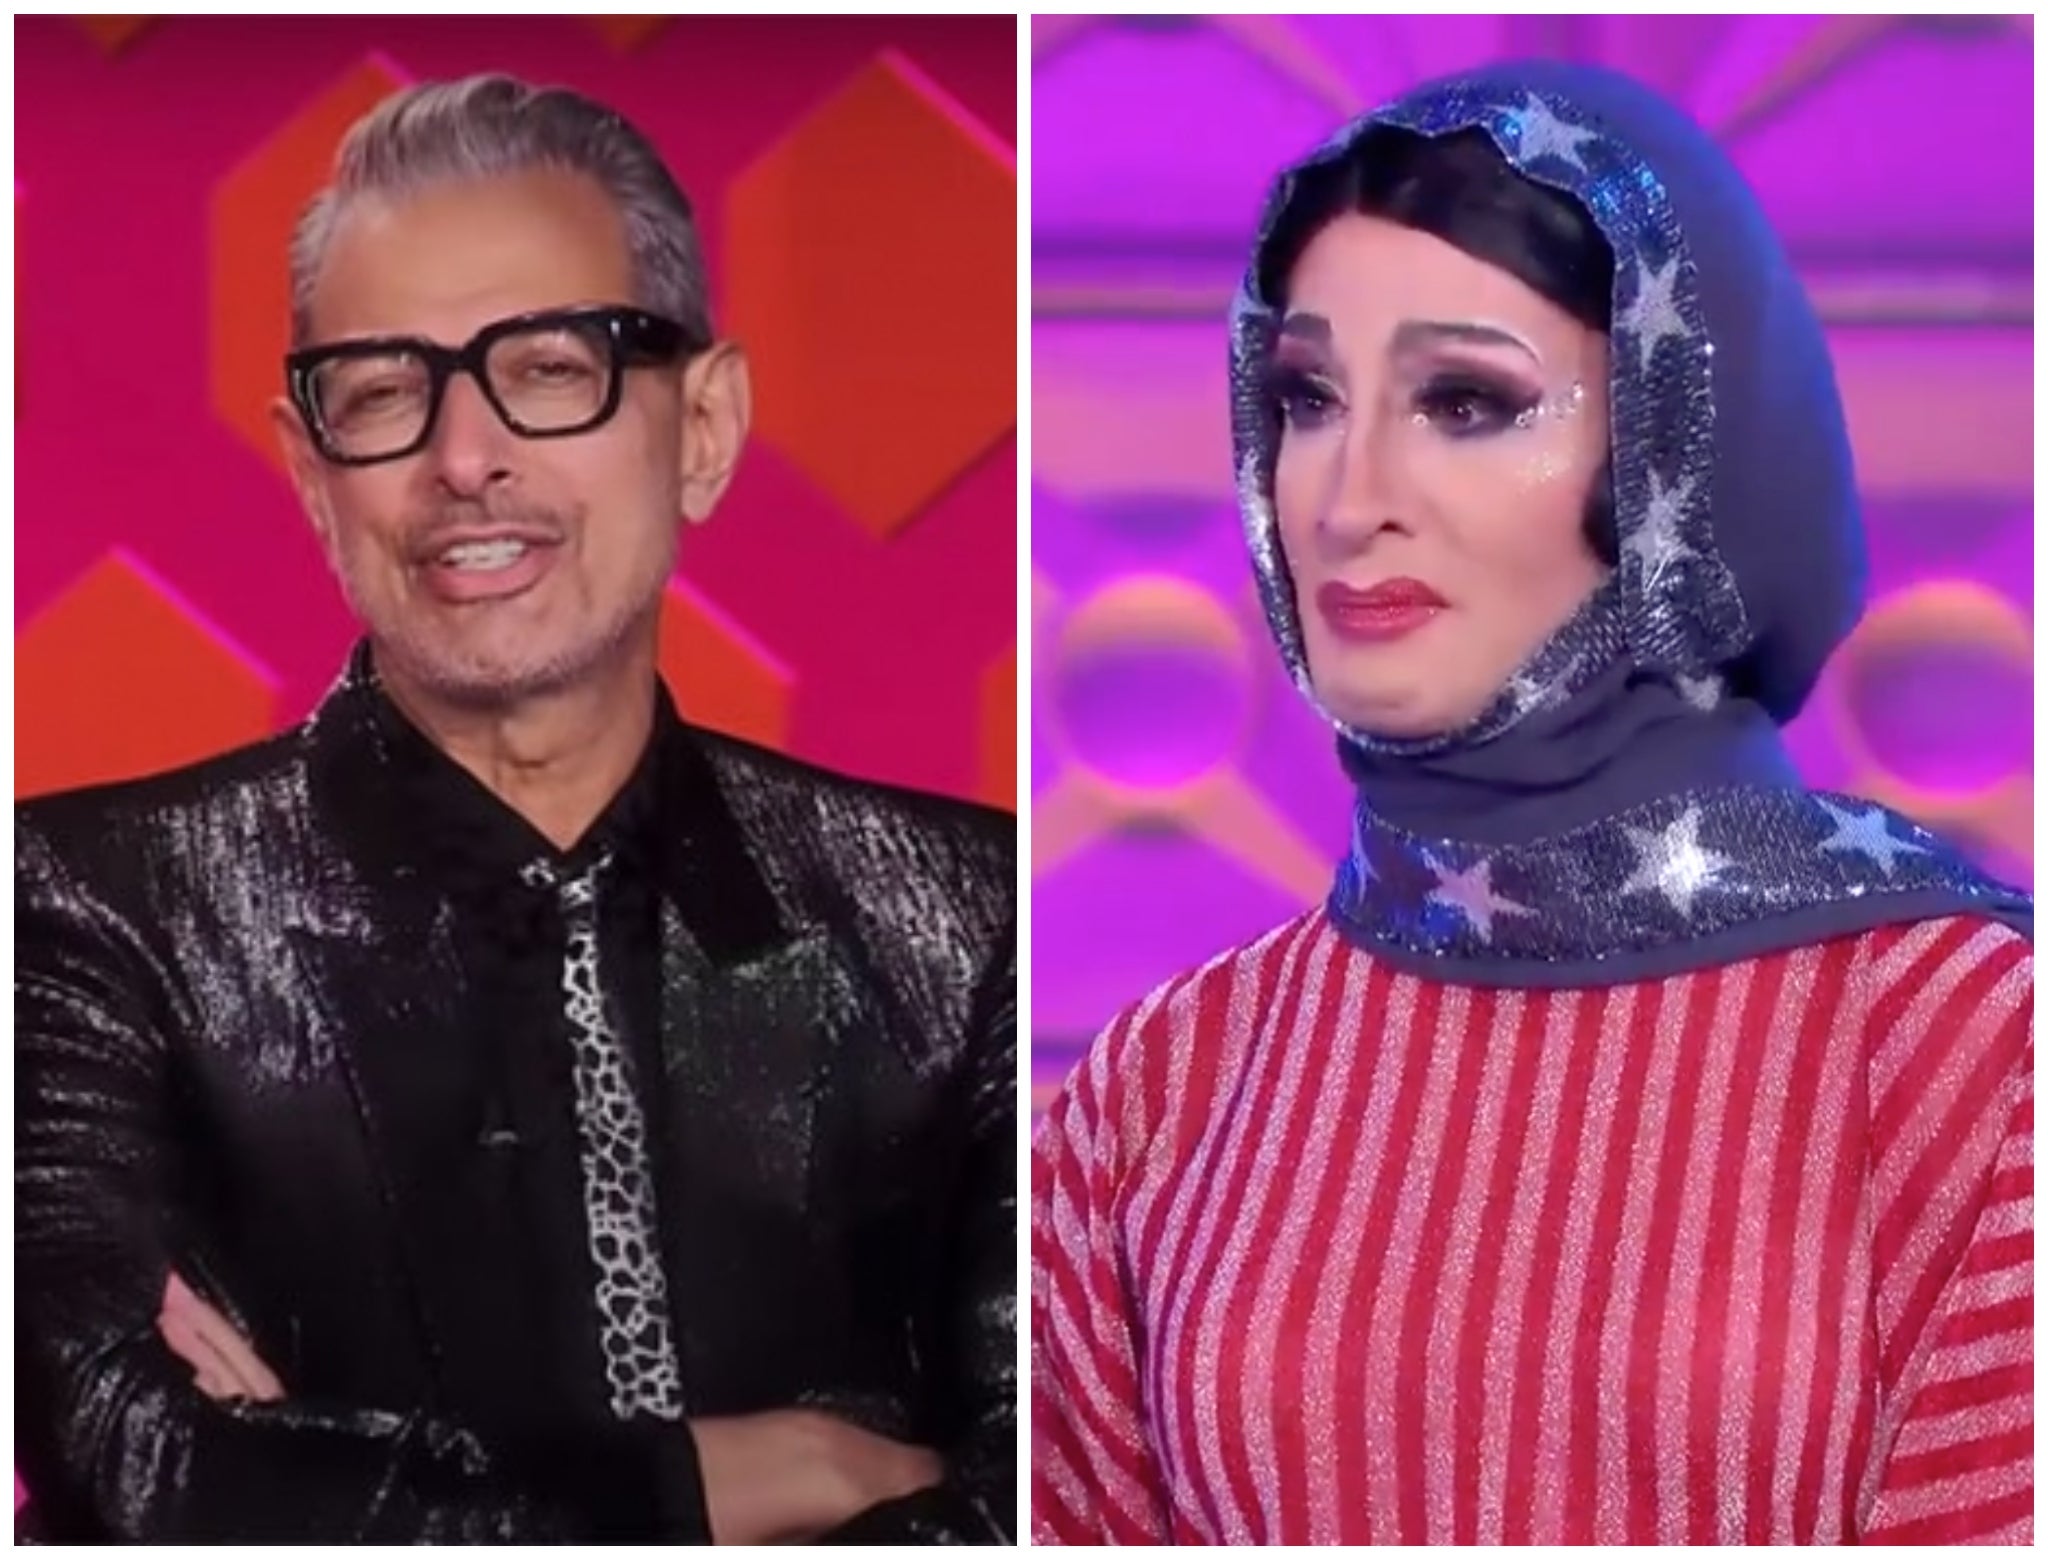 RuPauls Drag Race Jeff Goldblum receives backlash for Islam comments to Jackie Cox The Independent The Independent picture